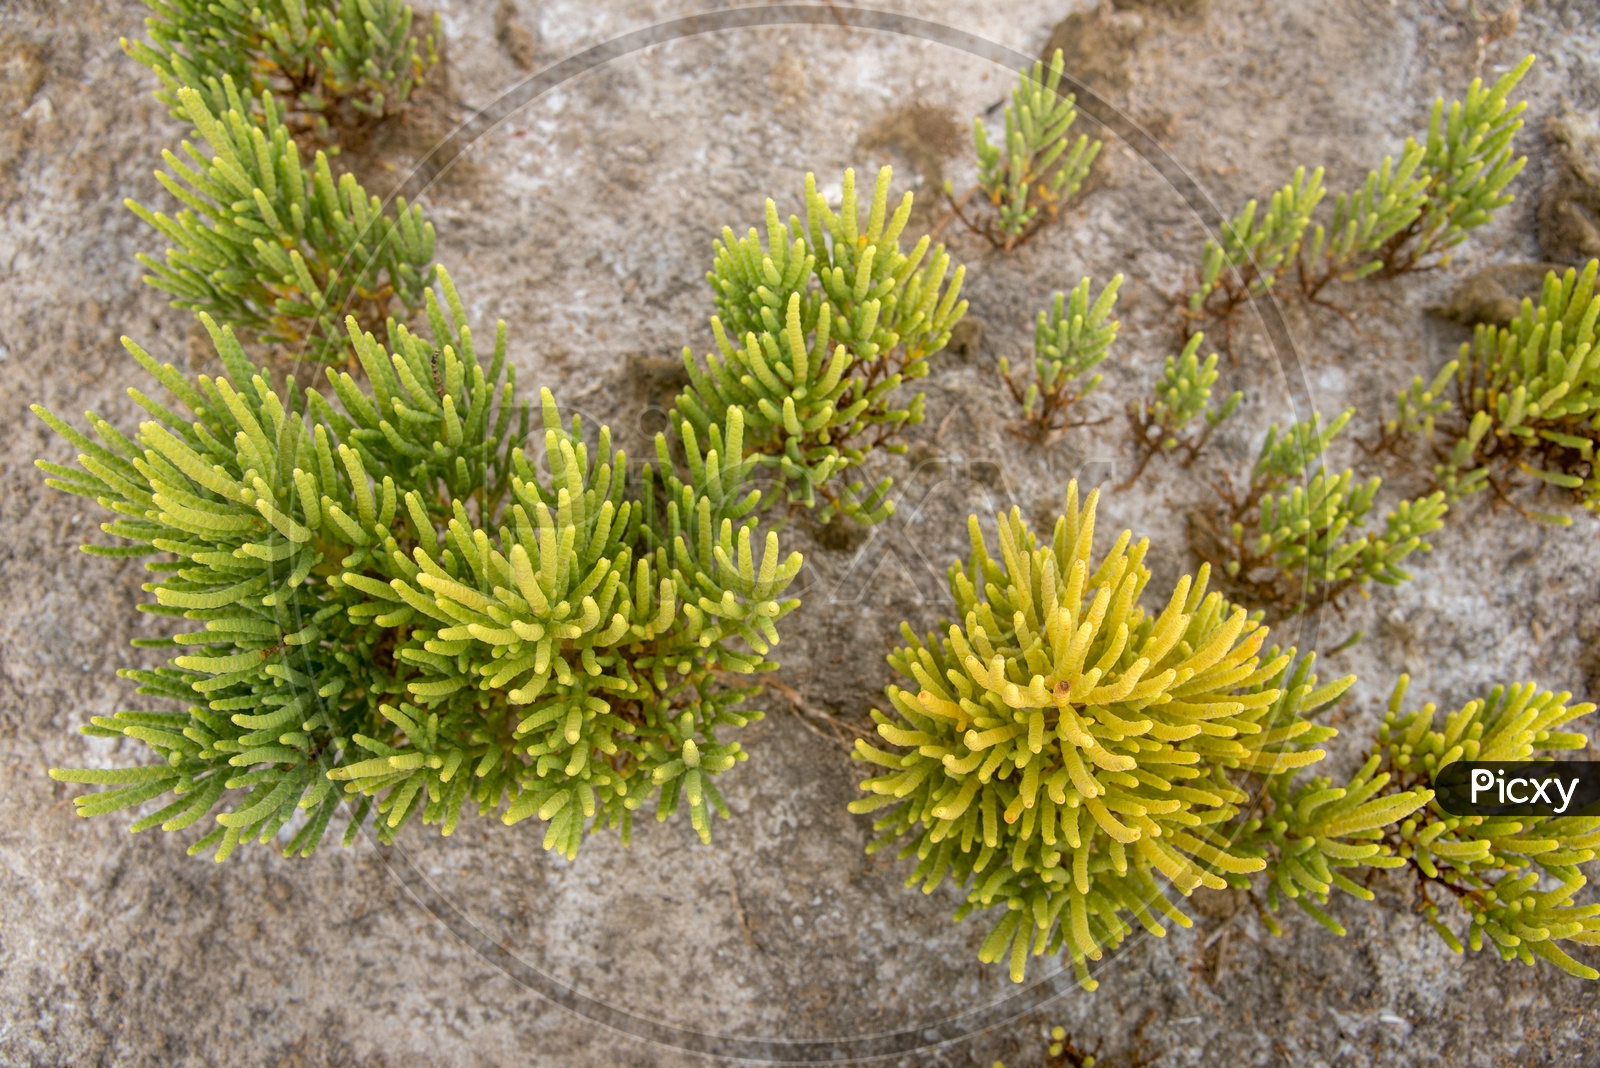 MOSS, commonly found bushes around salt waters.